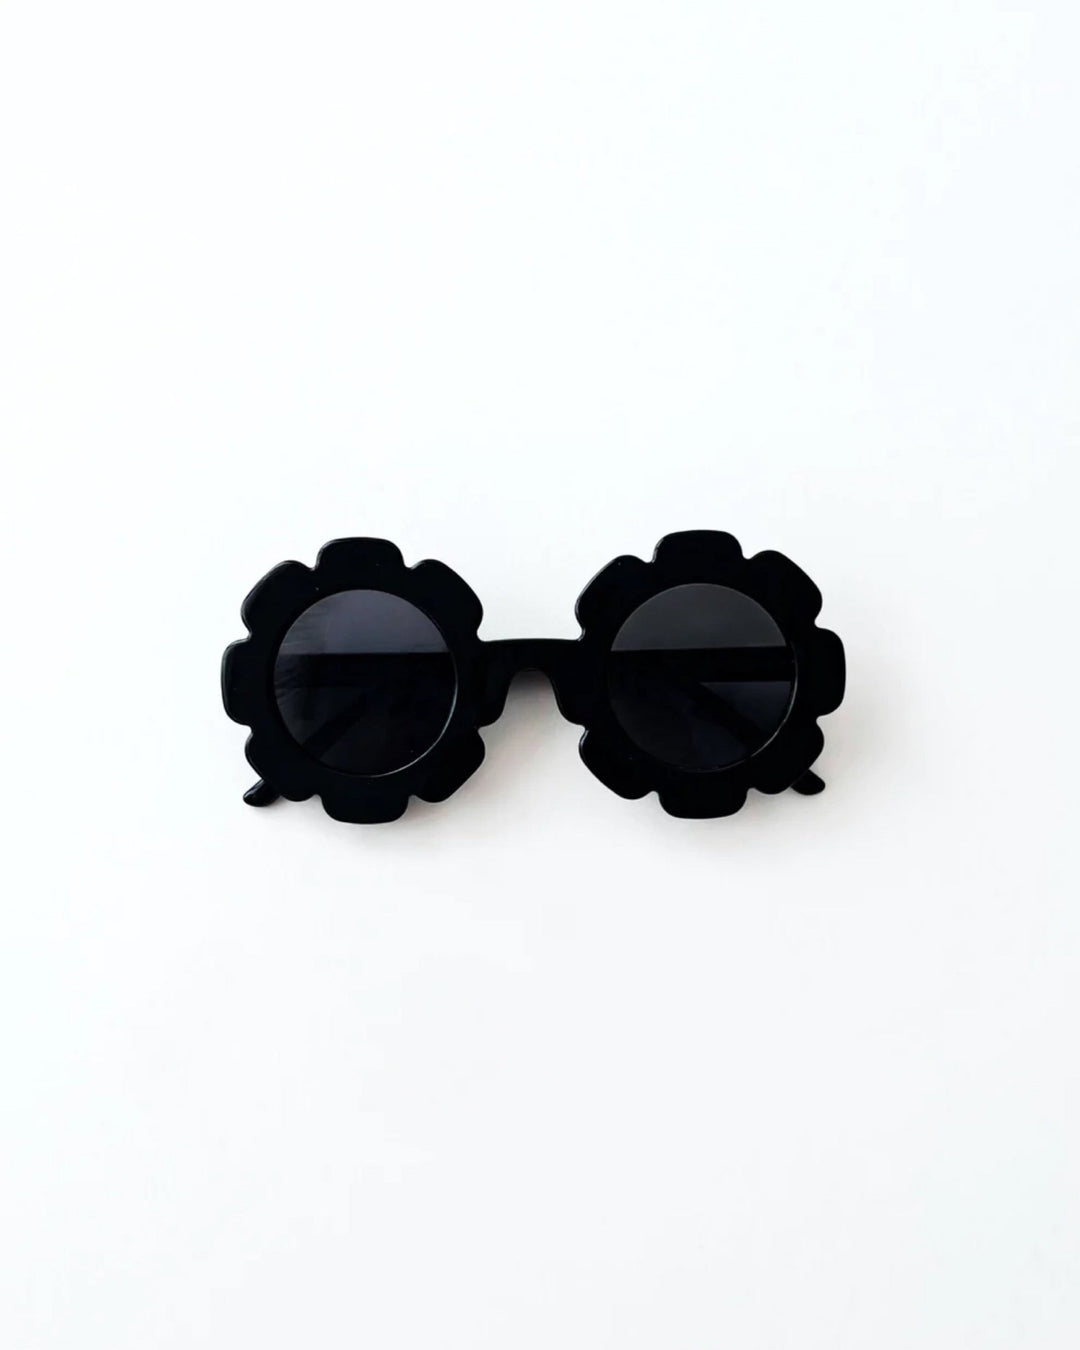 Flower Sunglasses, Black - Baby & Toddler Clothing Accessories - LUCKY PANDA KIDS